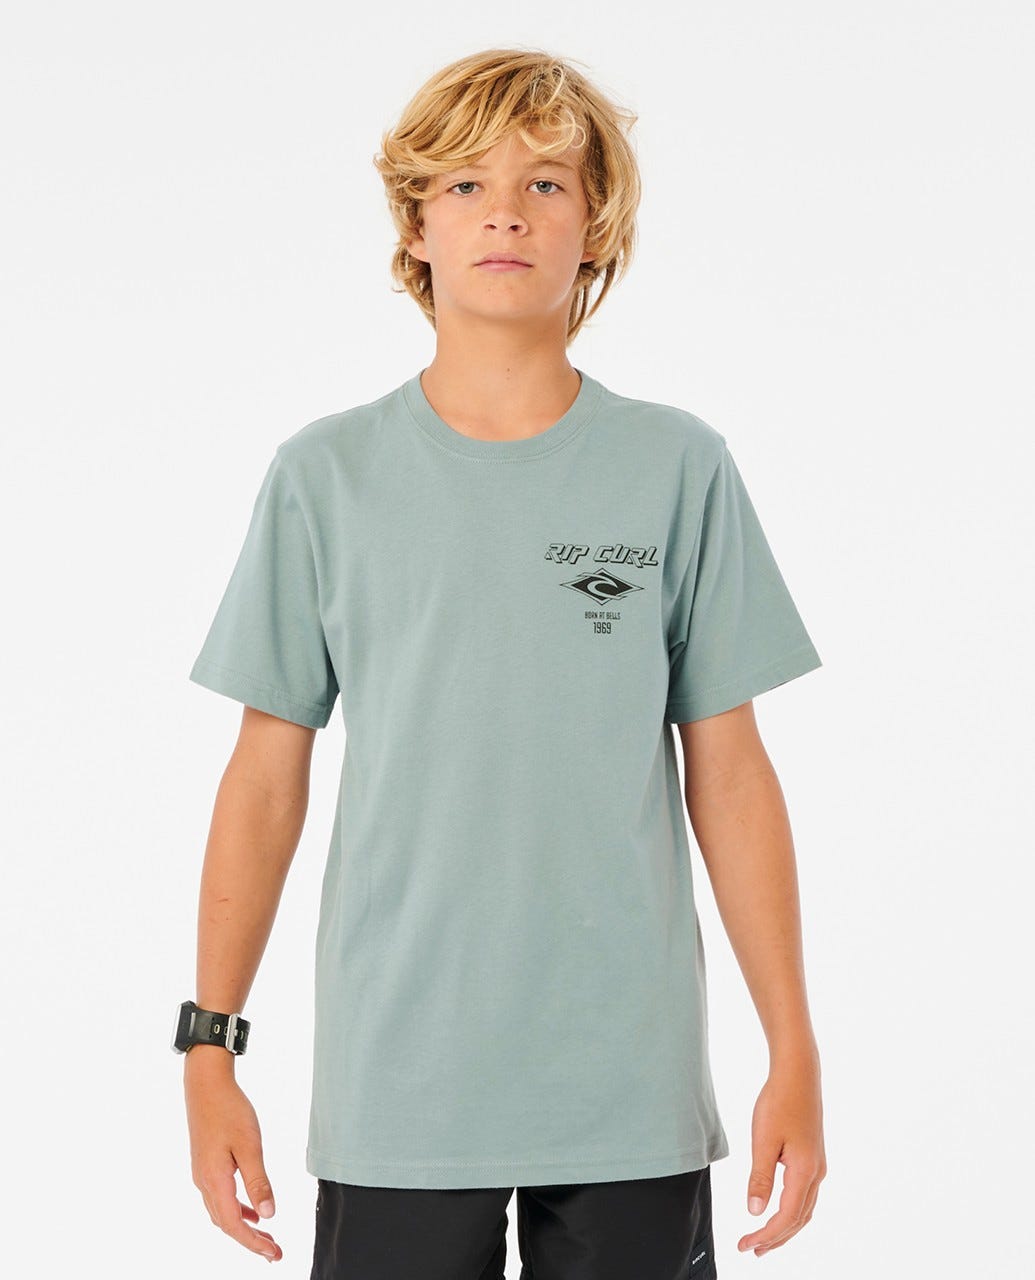 RIP CURL FADE OUT ICON KTESS9-4790 T-SHIRT SHORT SLEEVE (YB)